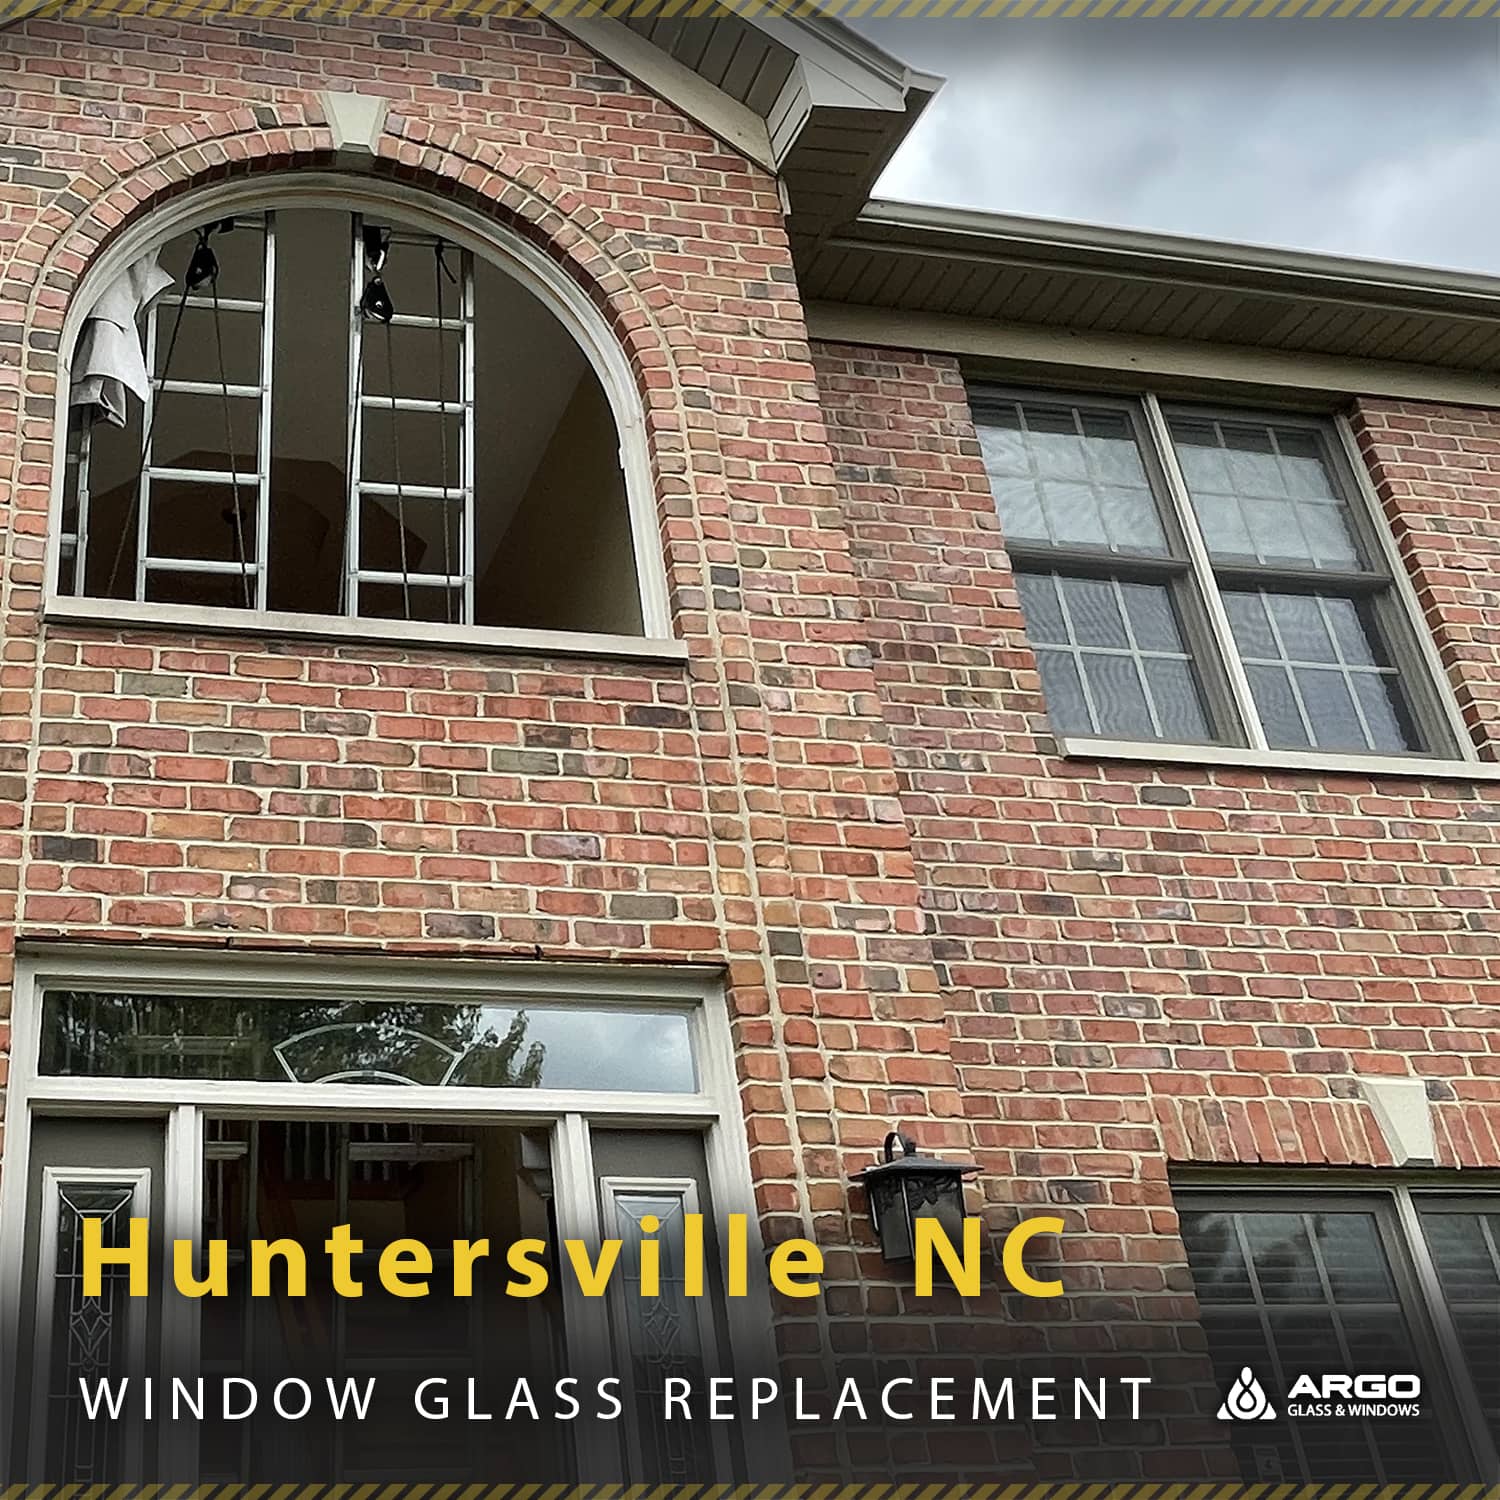 Professional Window Glass Replacement company